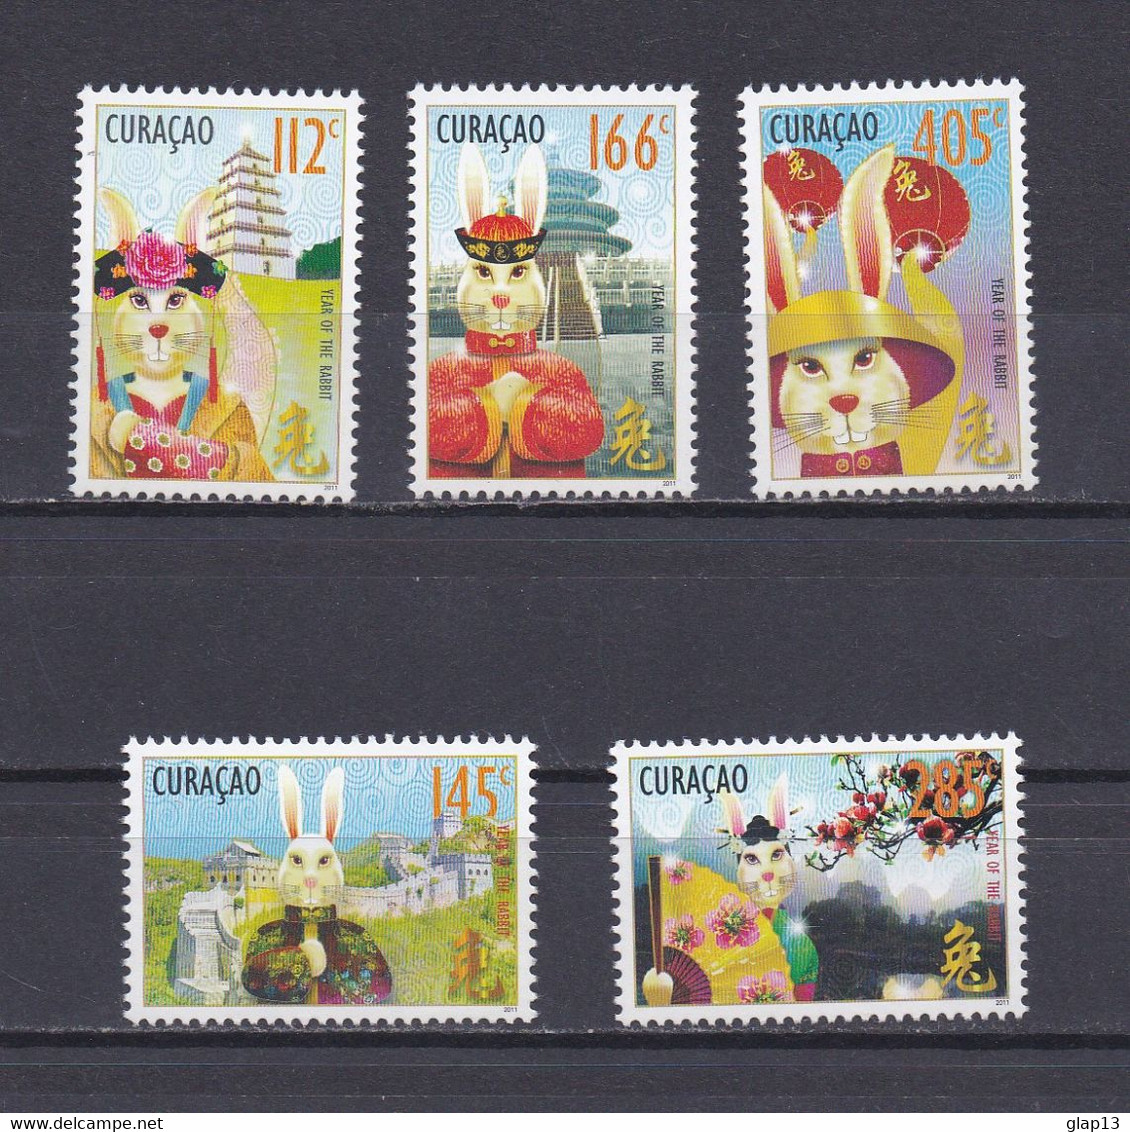 CURACAO 2011 TIMBRE N°209/13 NEUF** ANNEE DU LAPIN - West Indies